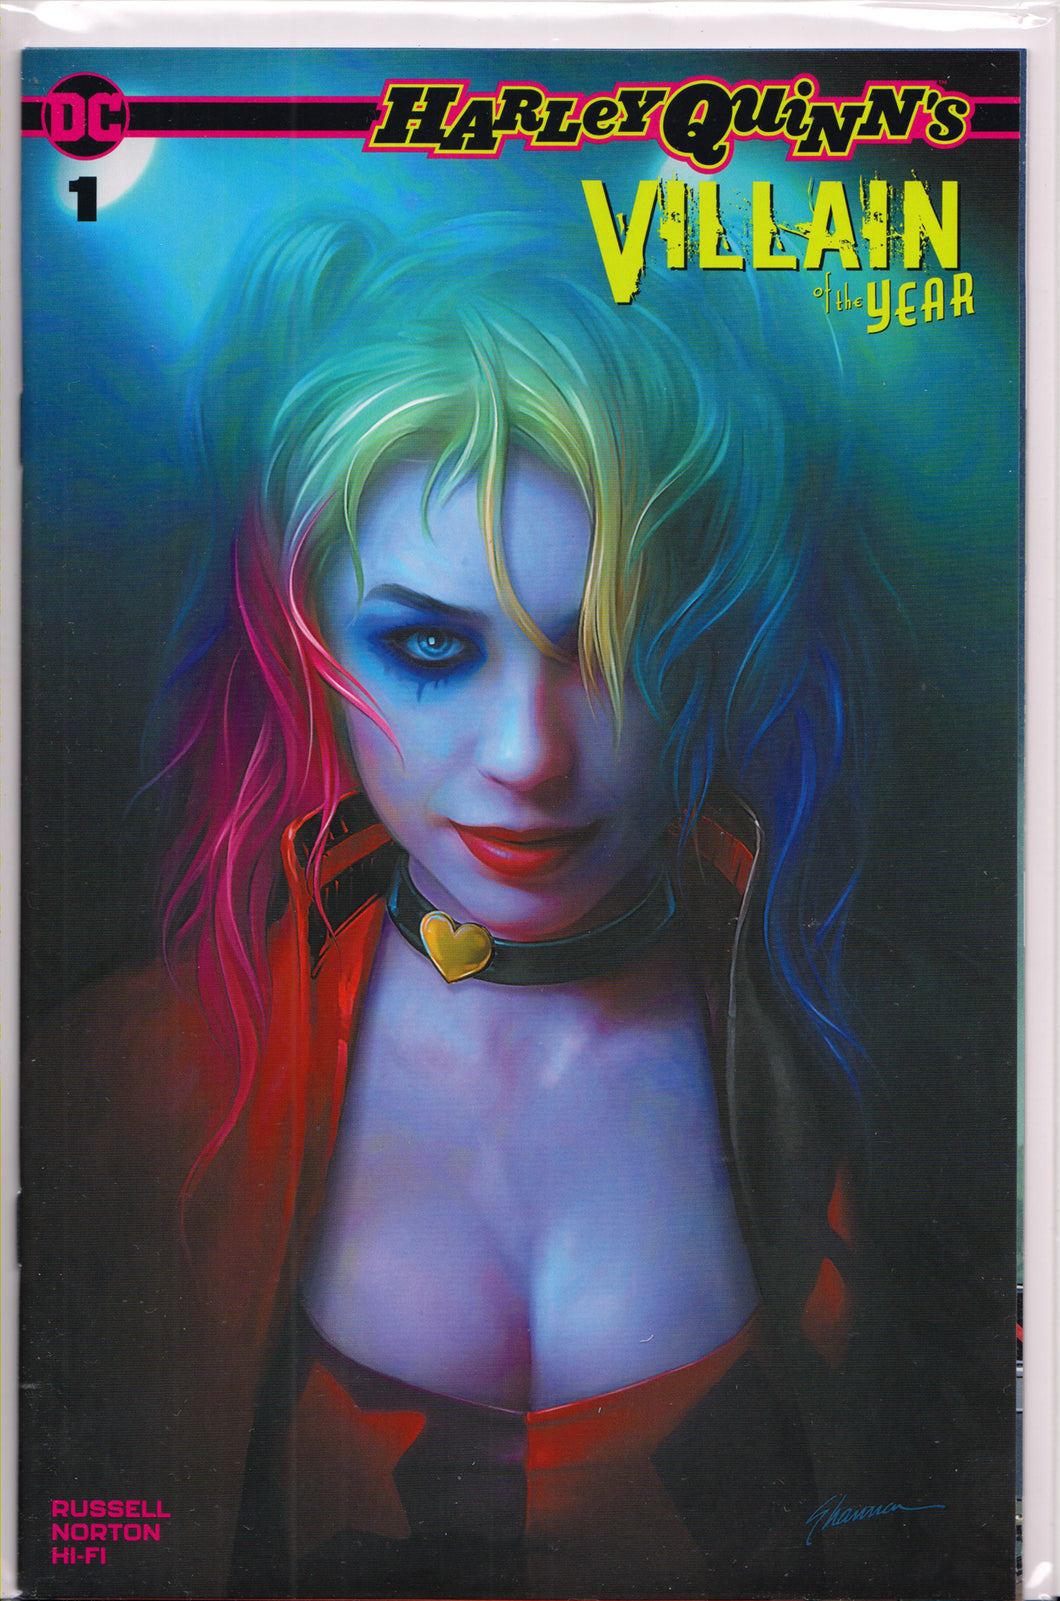 HARLEY QUINN'S VILLAIN OF THE YEAR #1 (SHANNON MAER EXCLUSIVE COVER) COMIC BOOK ~ DC Comics